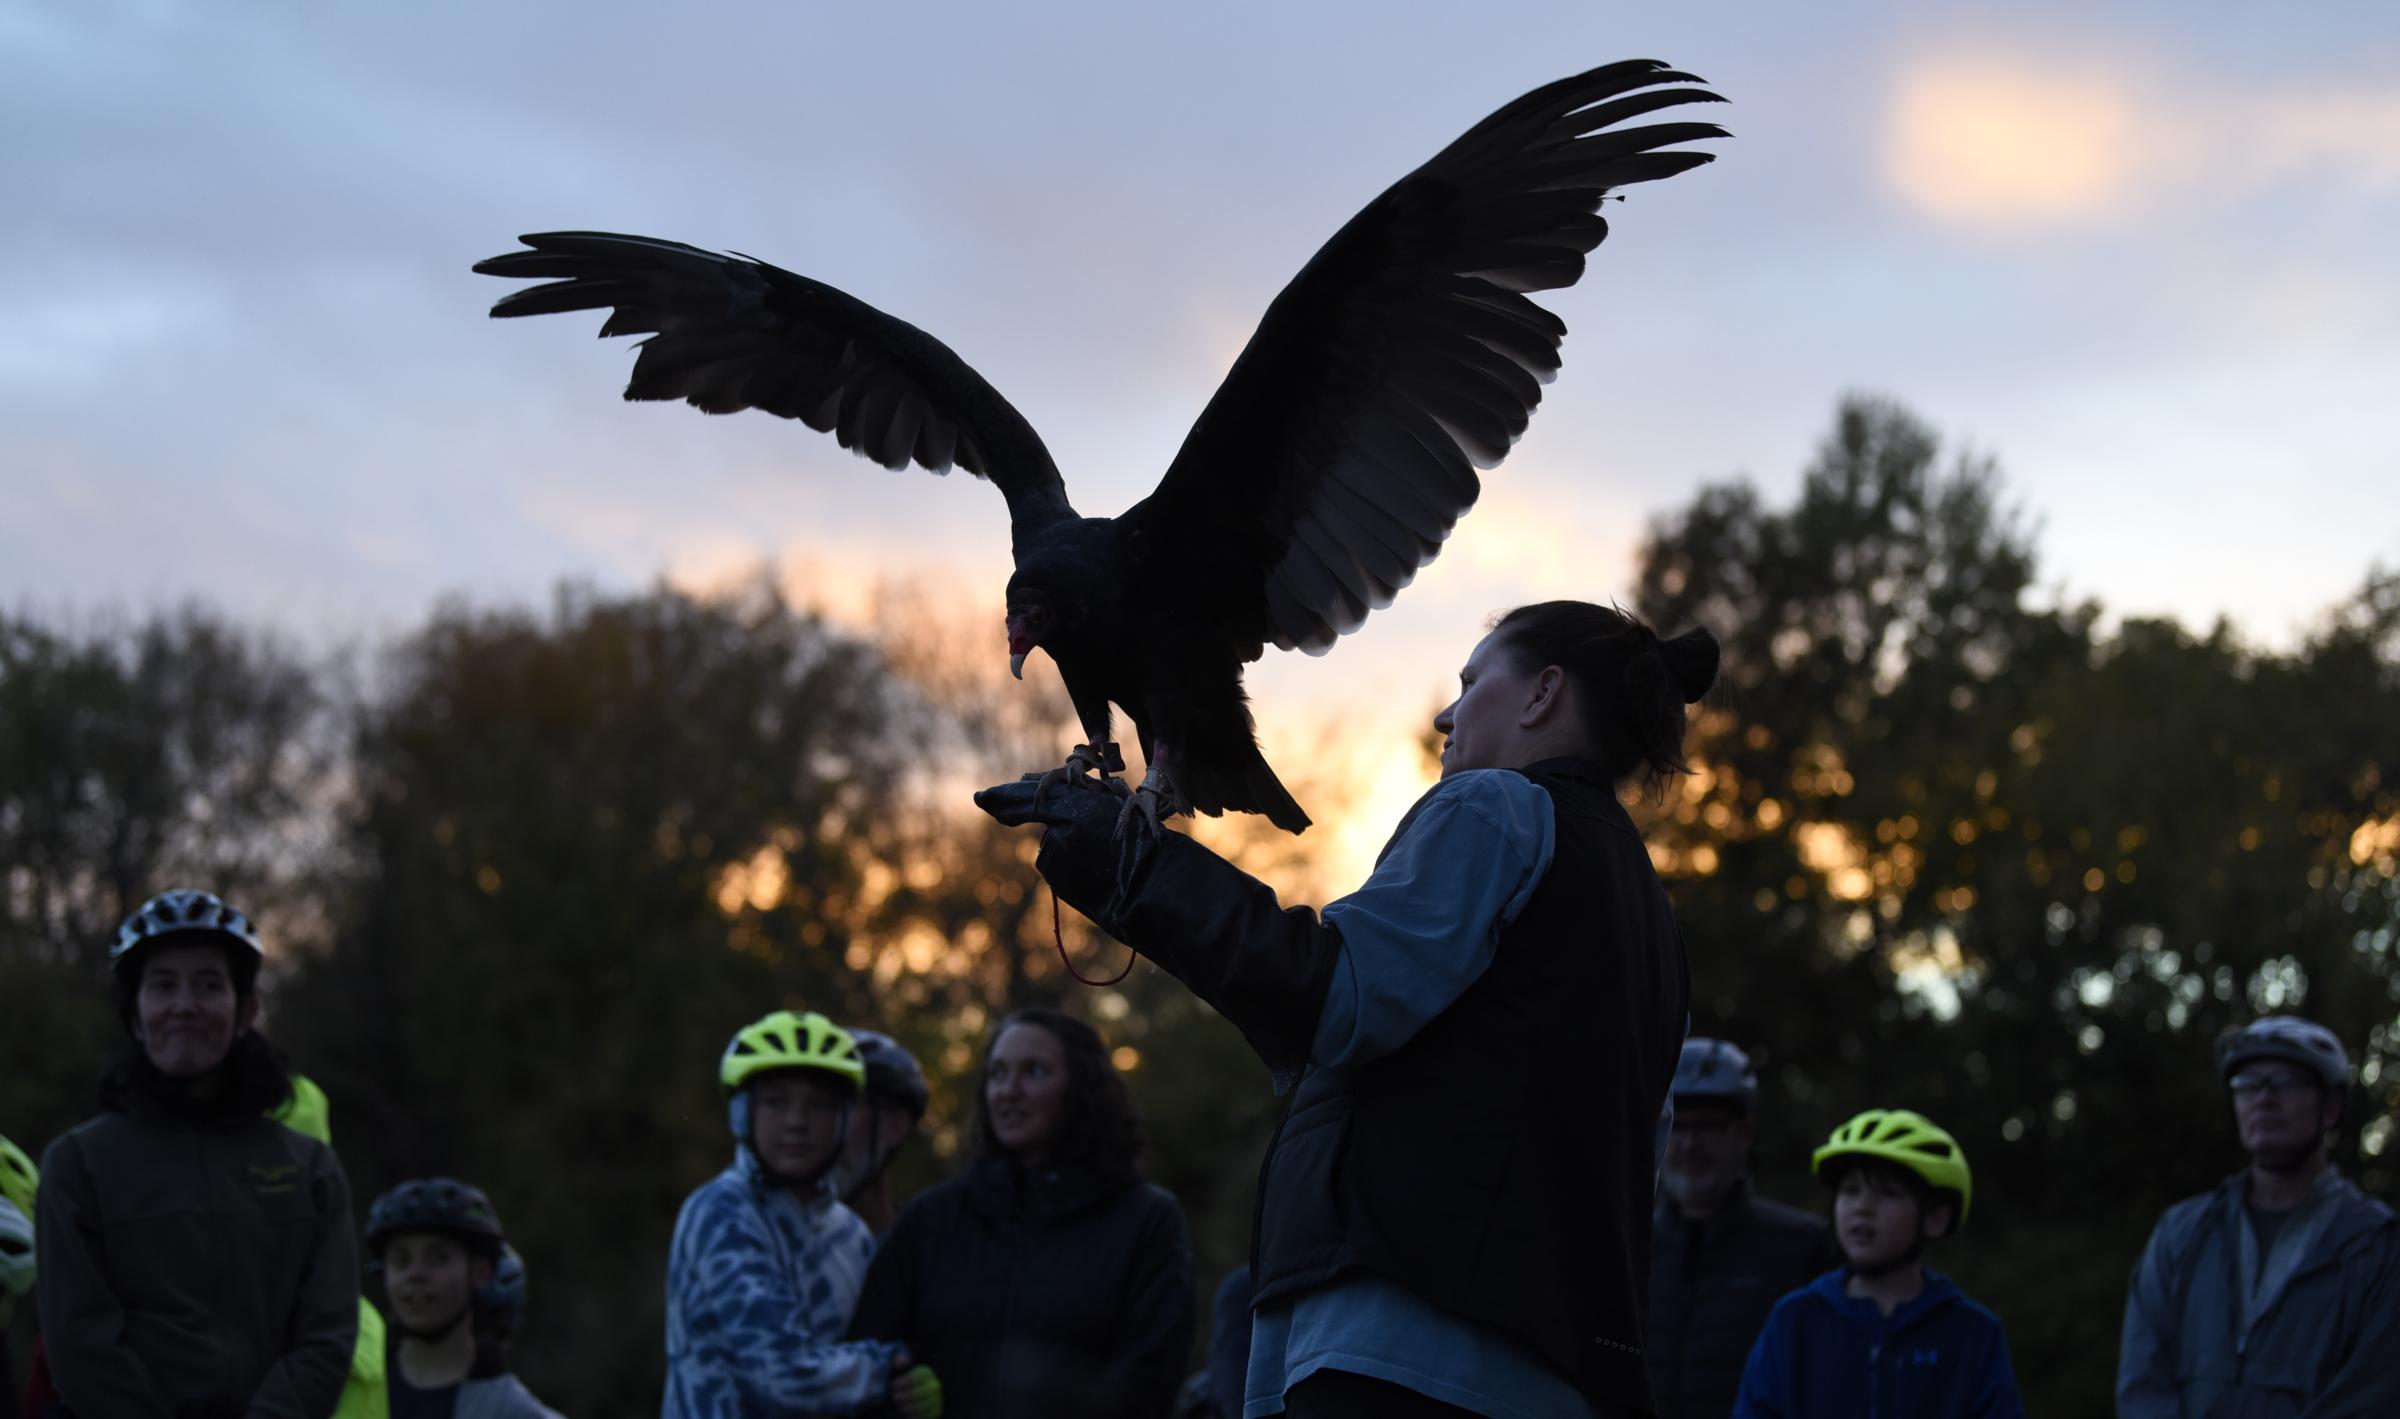 Community, competition and mountain biking - Lizette Somer holds a raptor while answering questions...